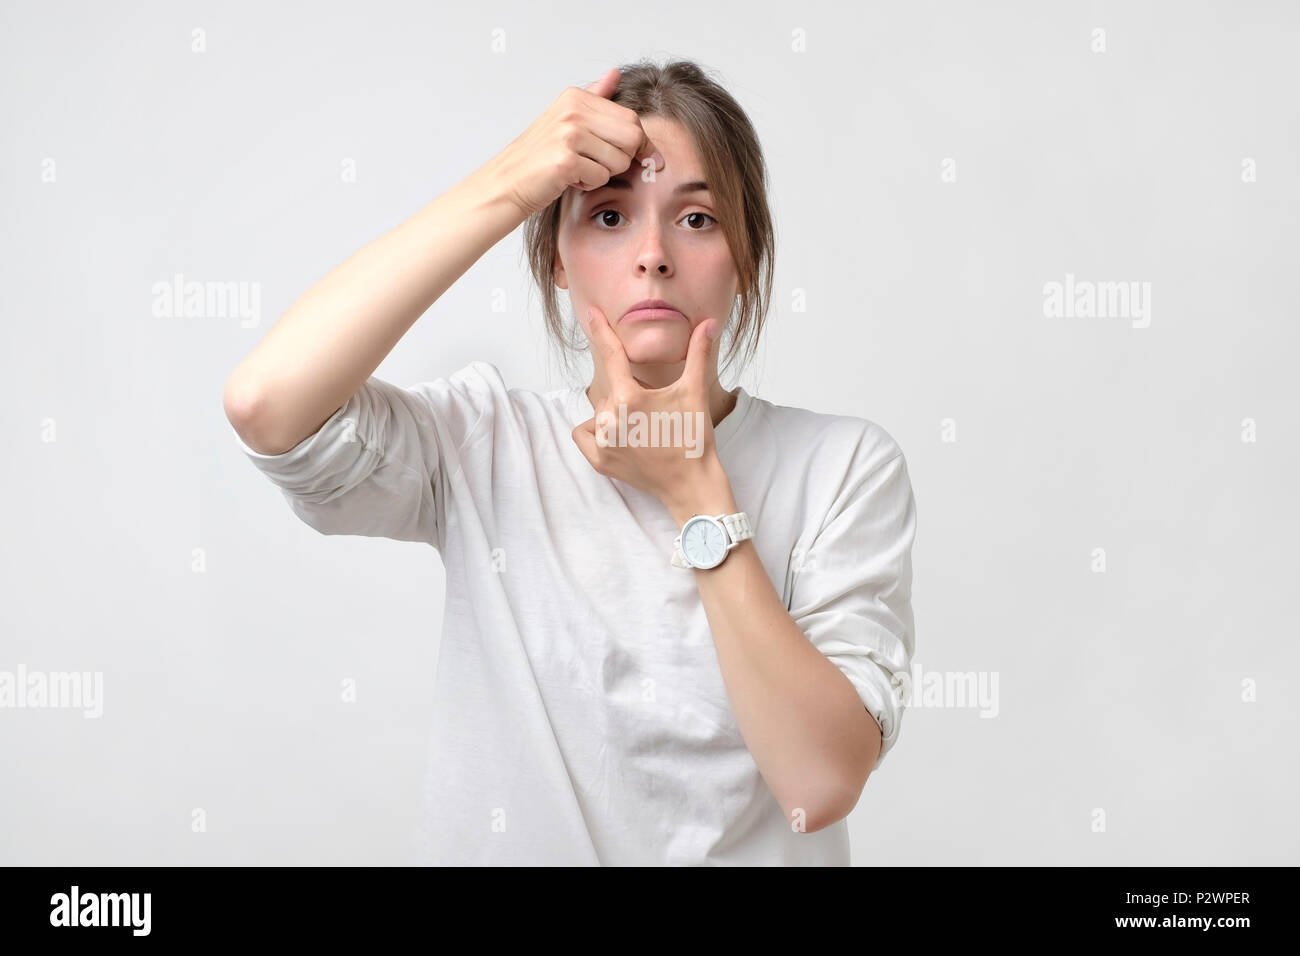 Pretty caucasian woman pulling a smile on her face. Concept of loss of work or being alone. Bad facial emotion because of depression Stock Photo